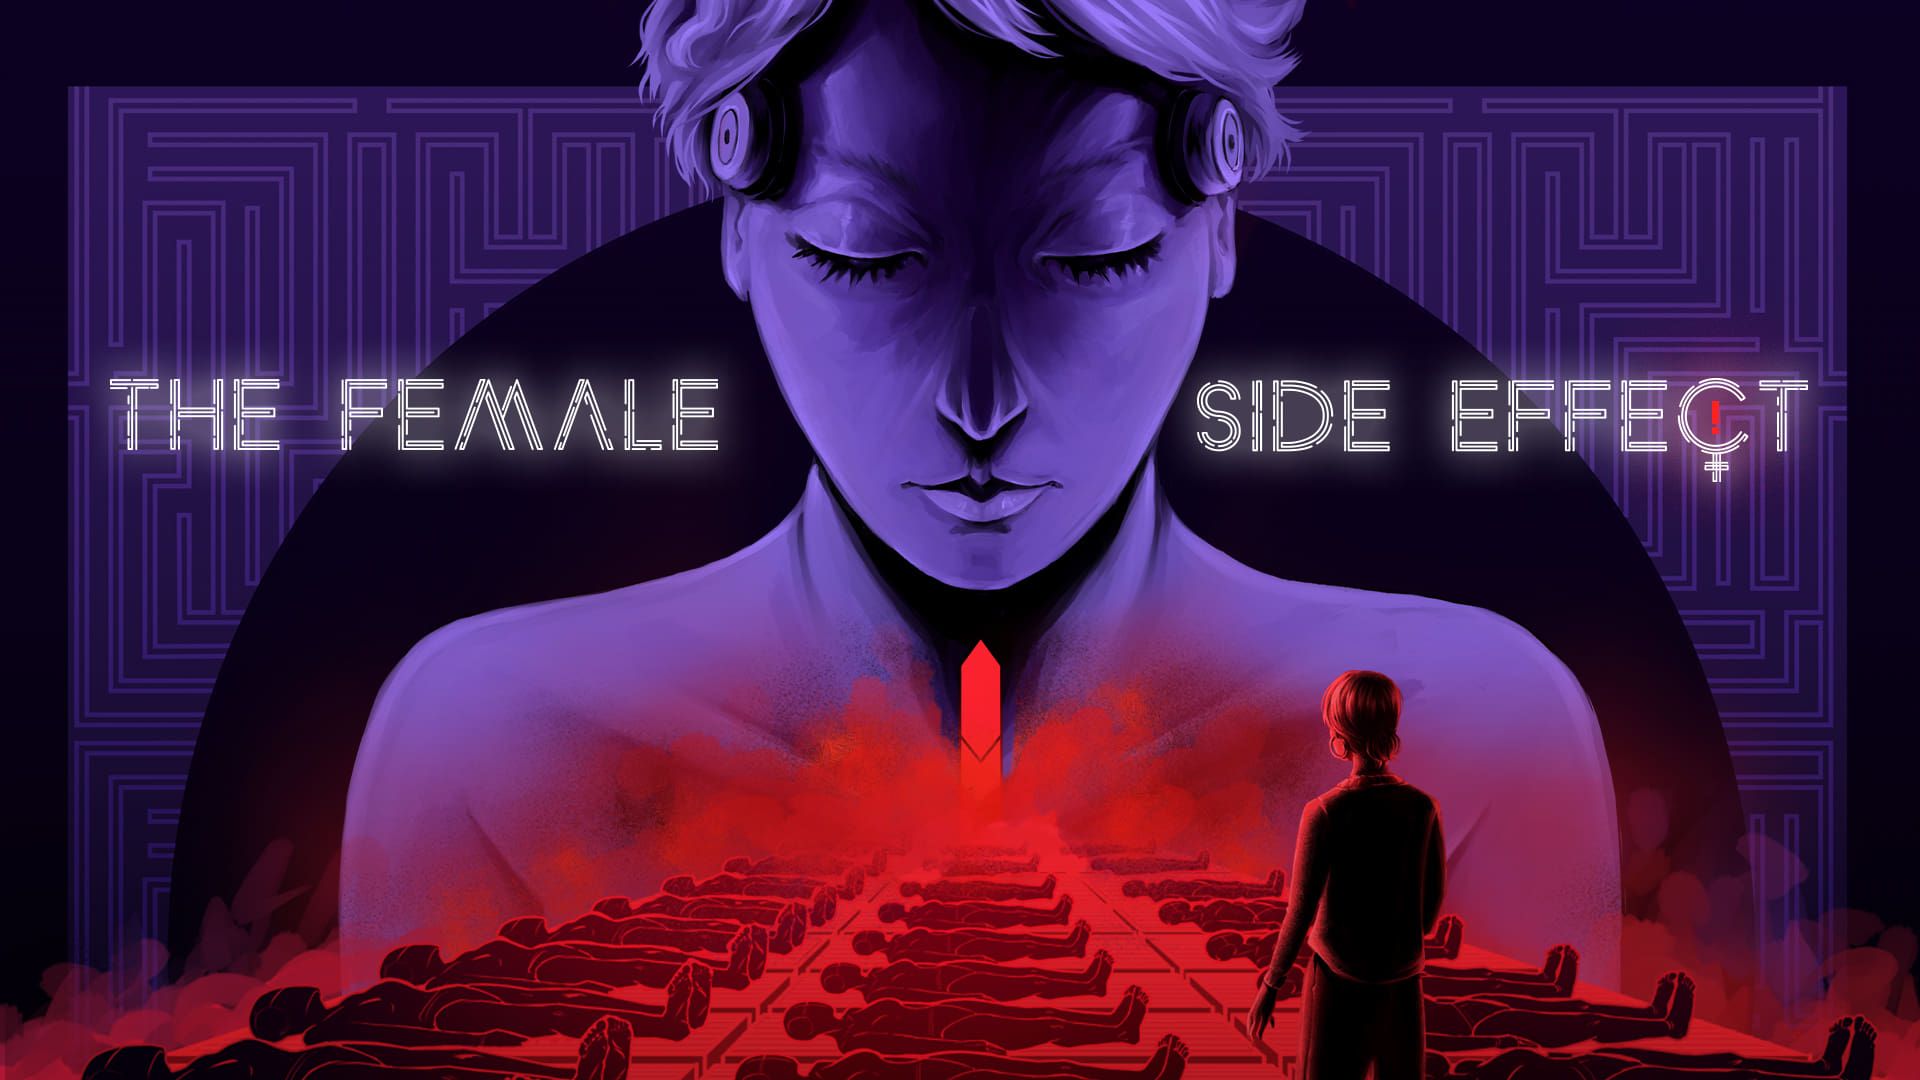 The Female Side Effect background